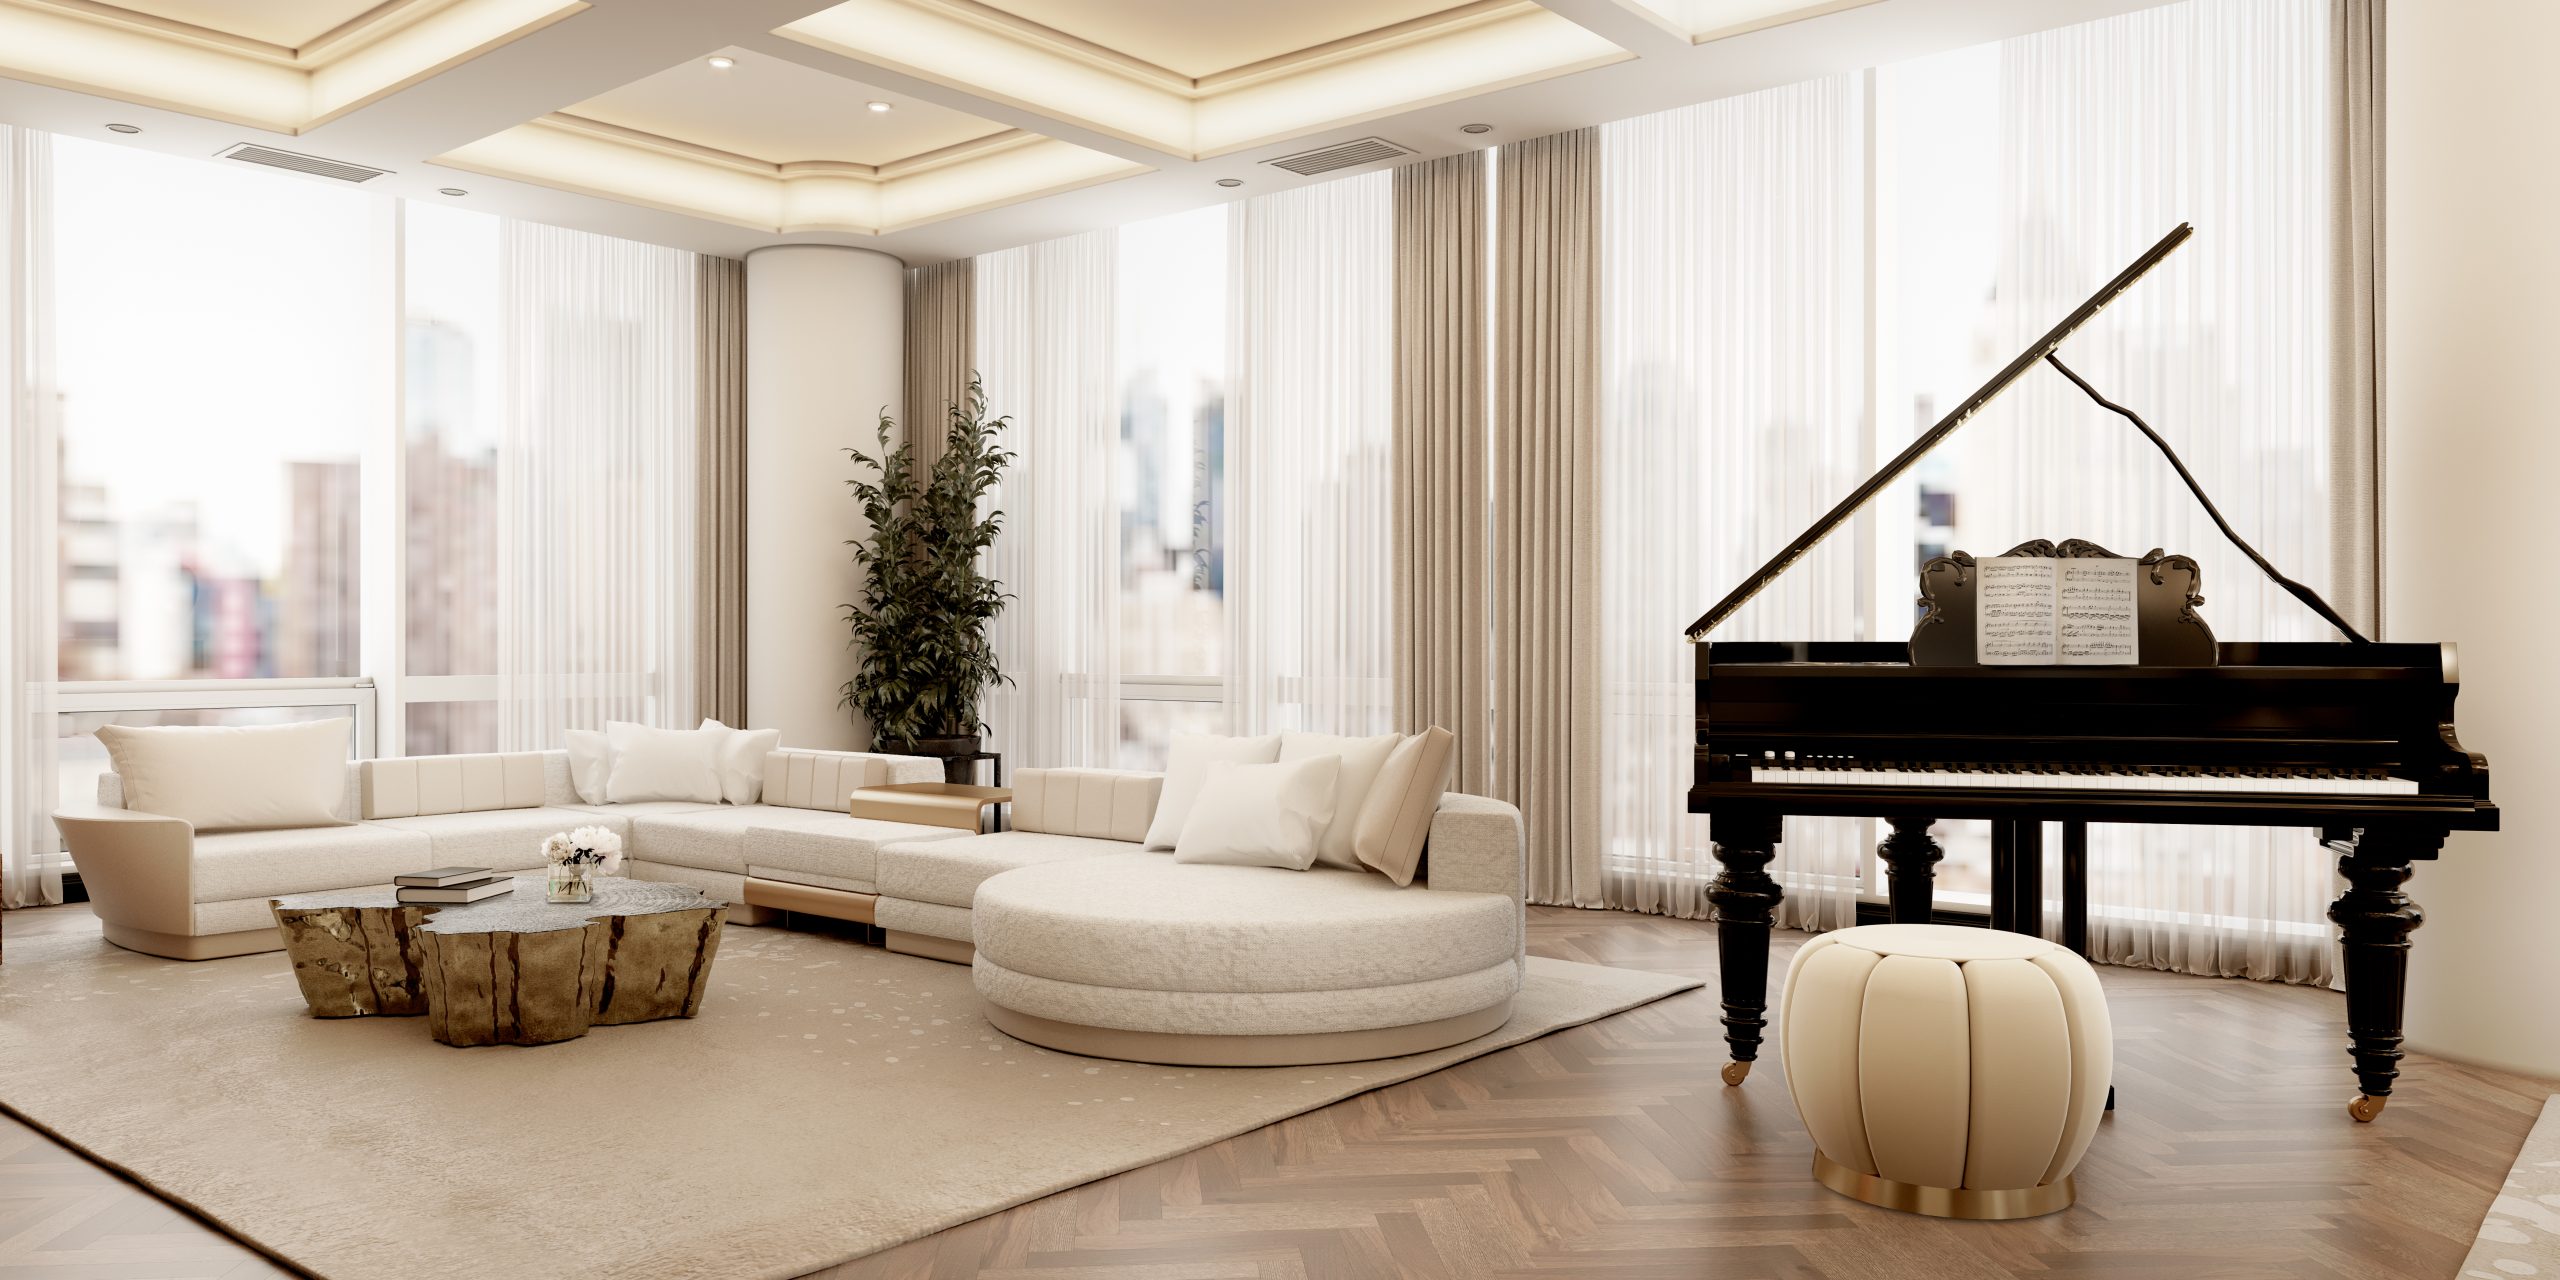 Marvel At These Living Room with a gorgeous piano